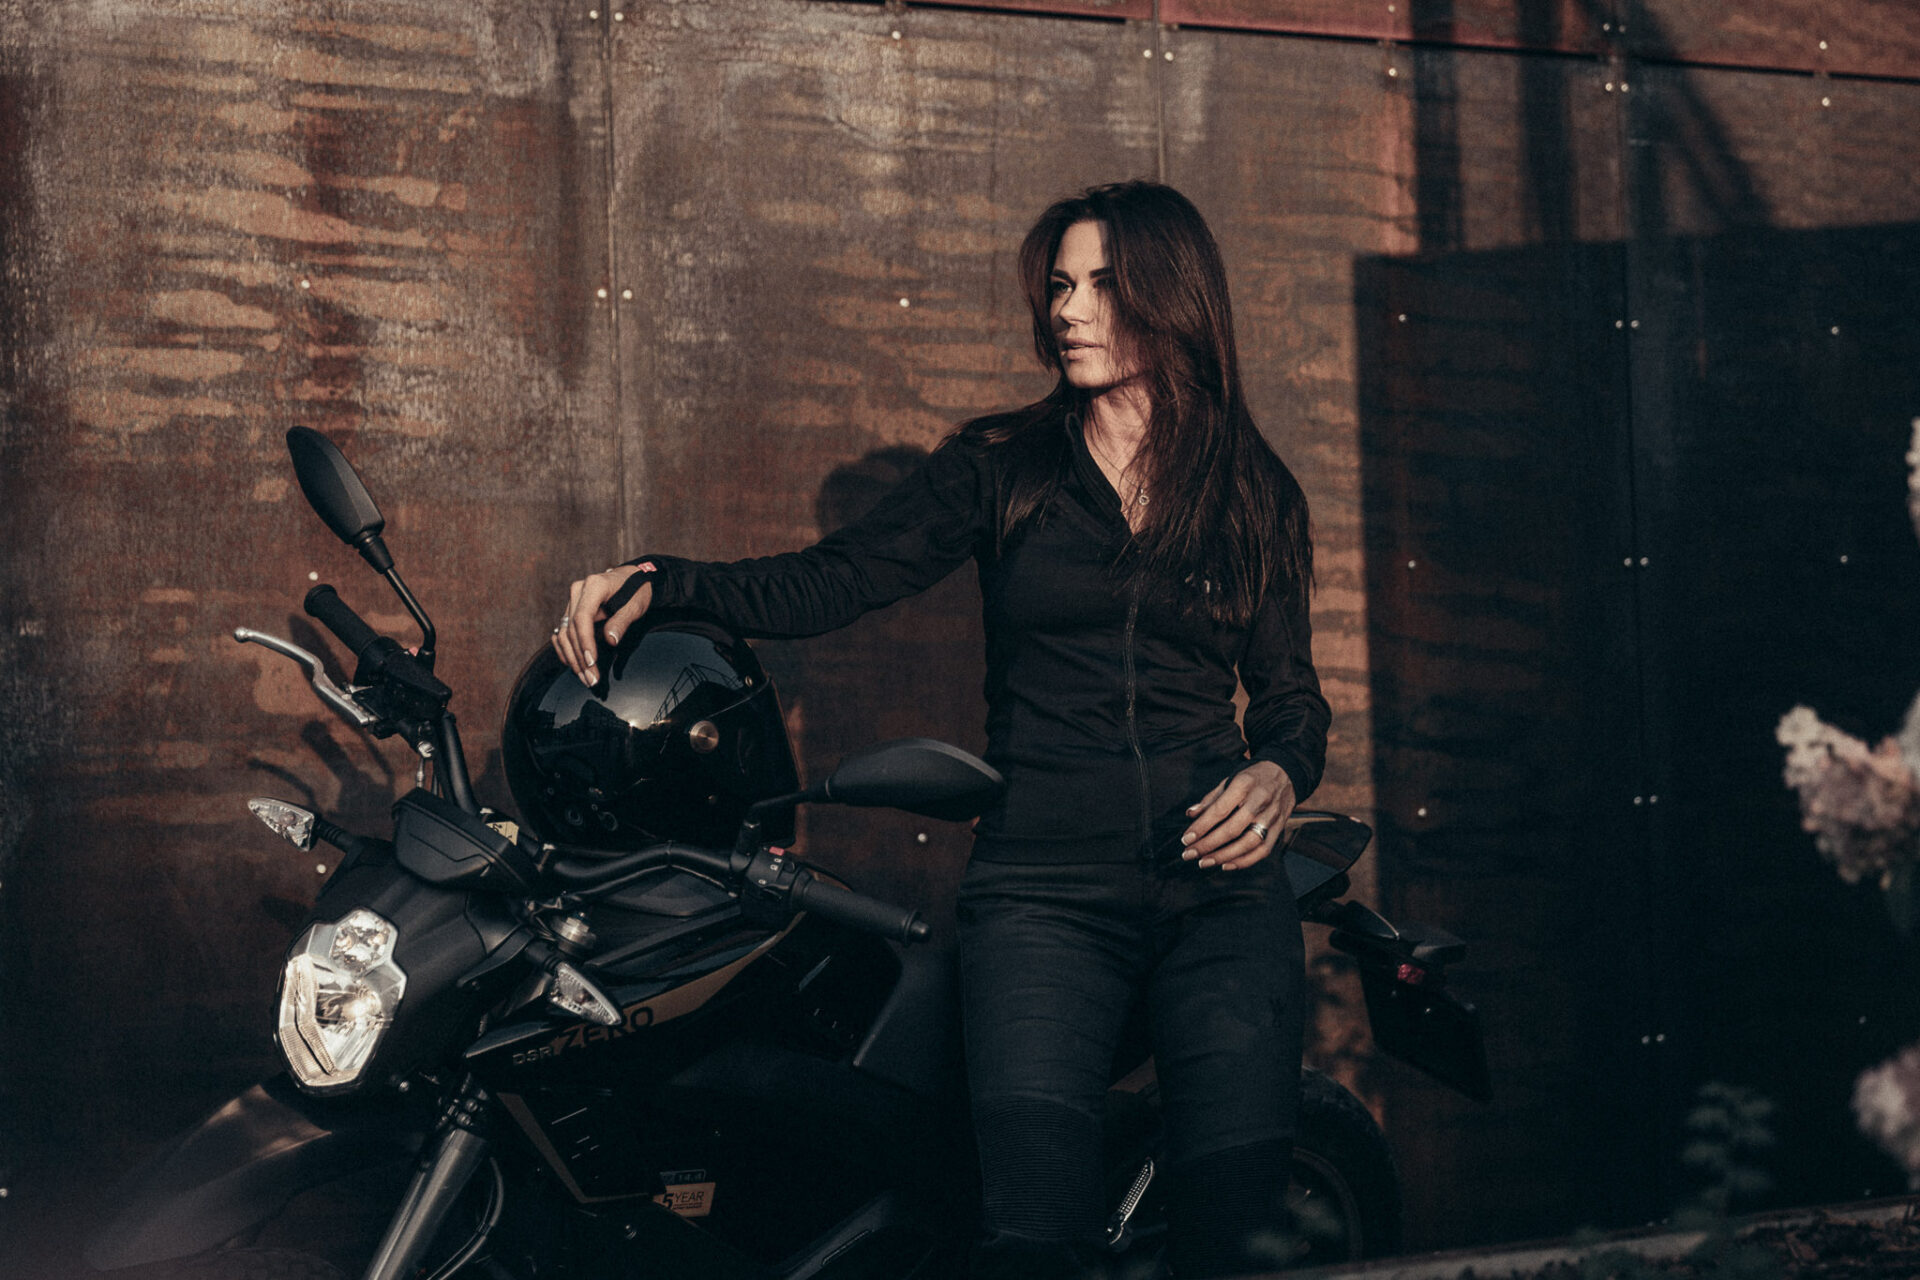 Women's Motorcycle Gear and Apparel | Where Fashion Meets Safety | Chic  Riot | Women's Motorcycle Gear